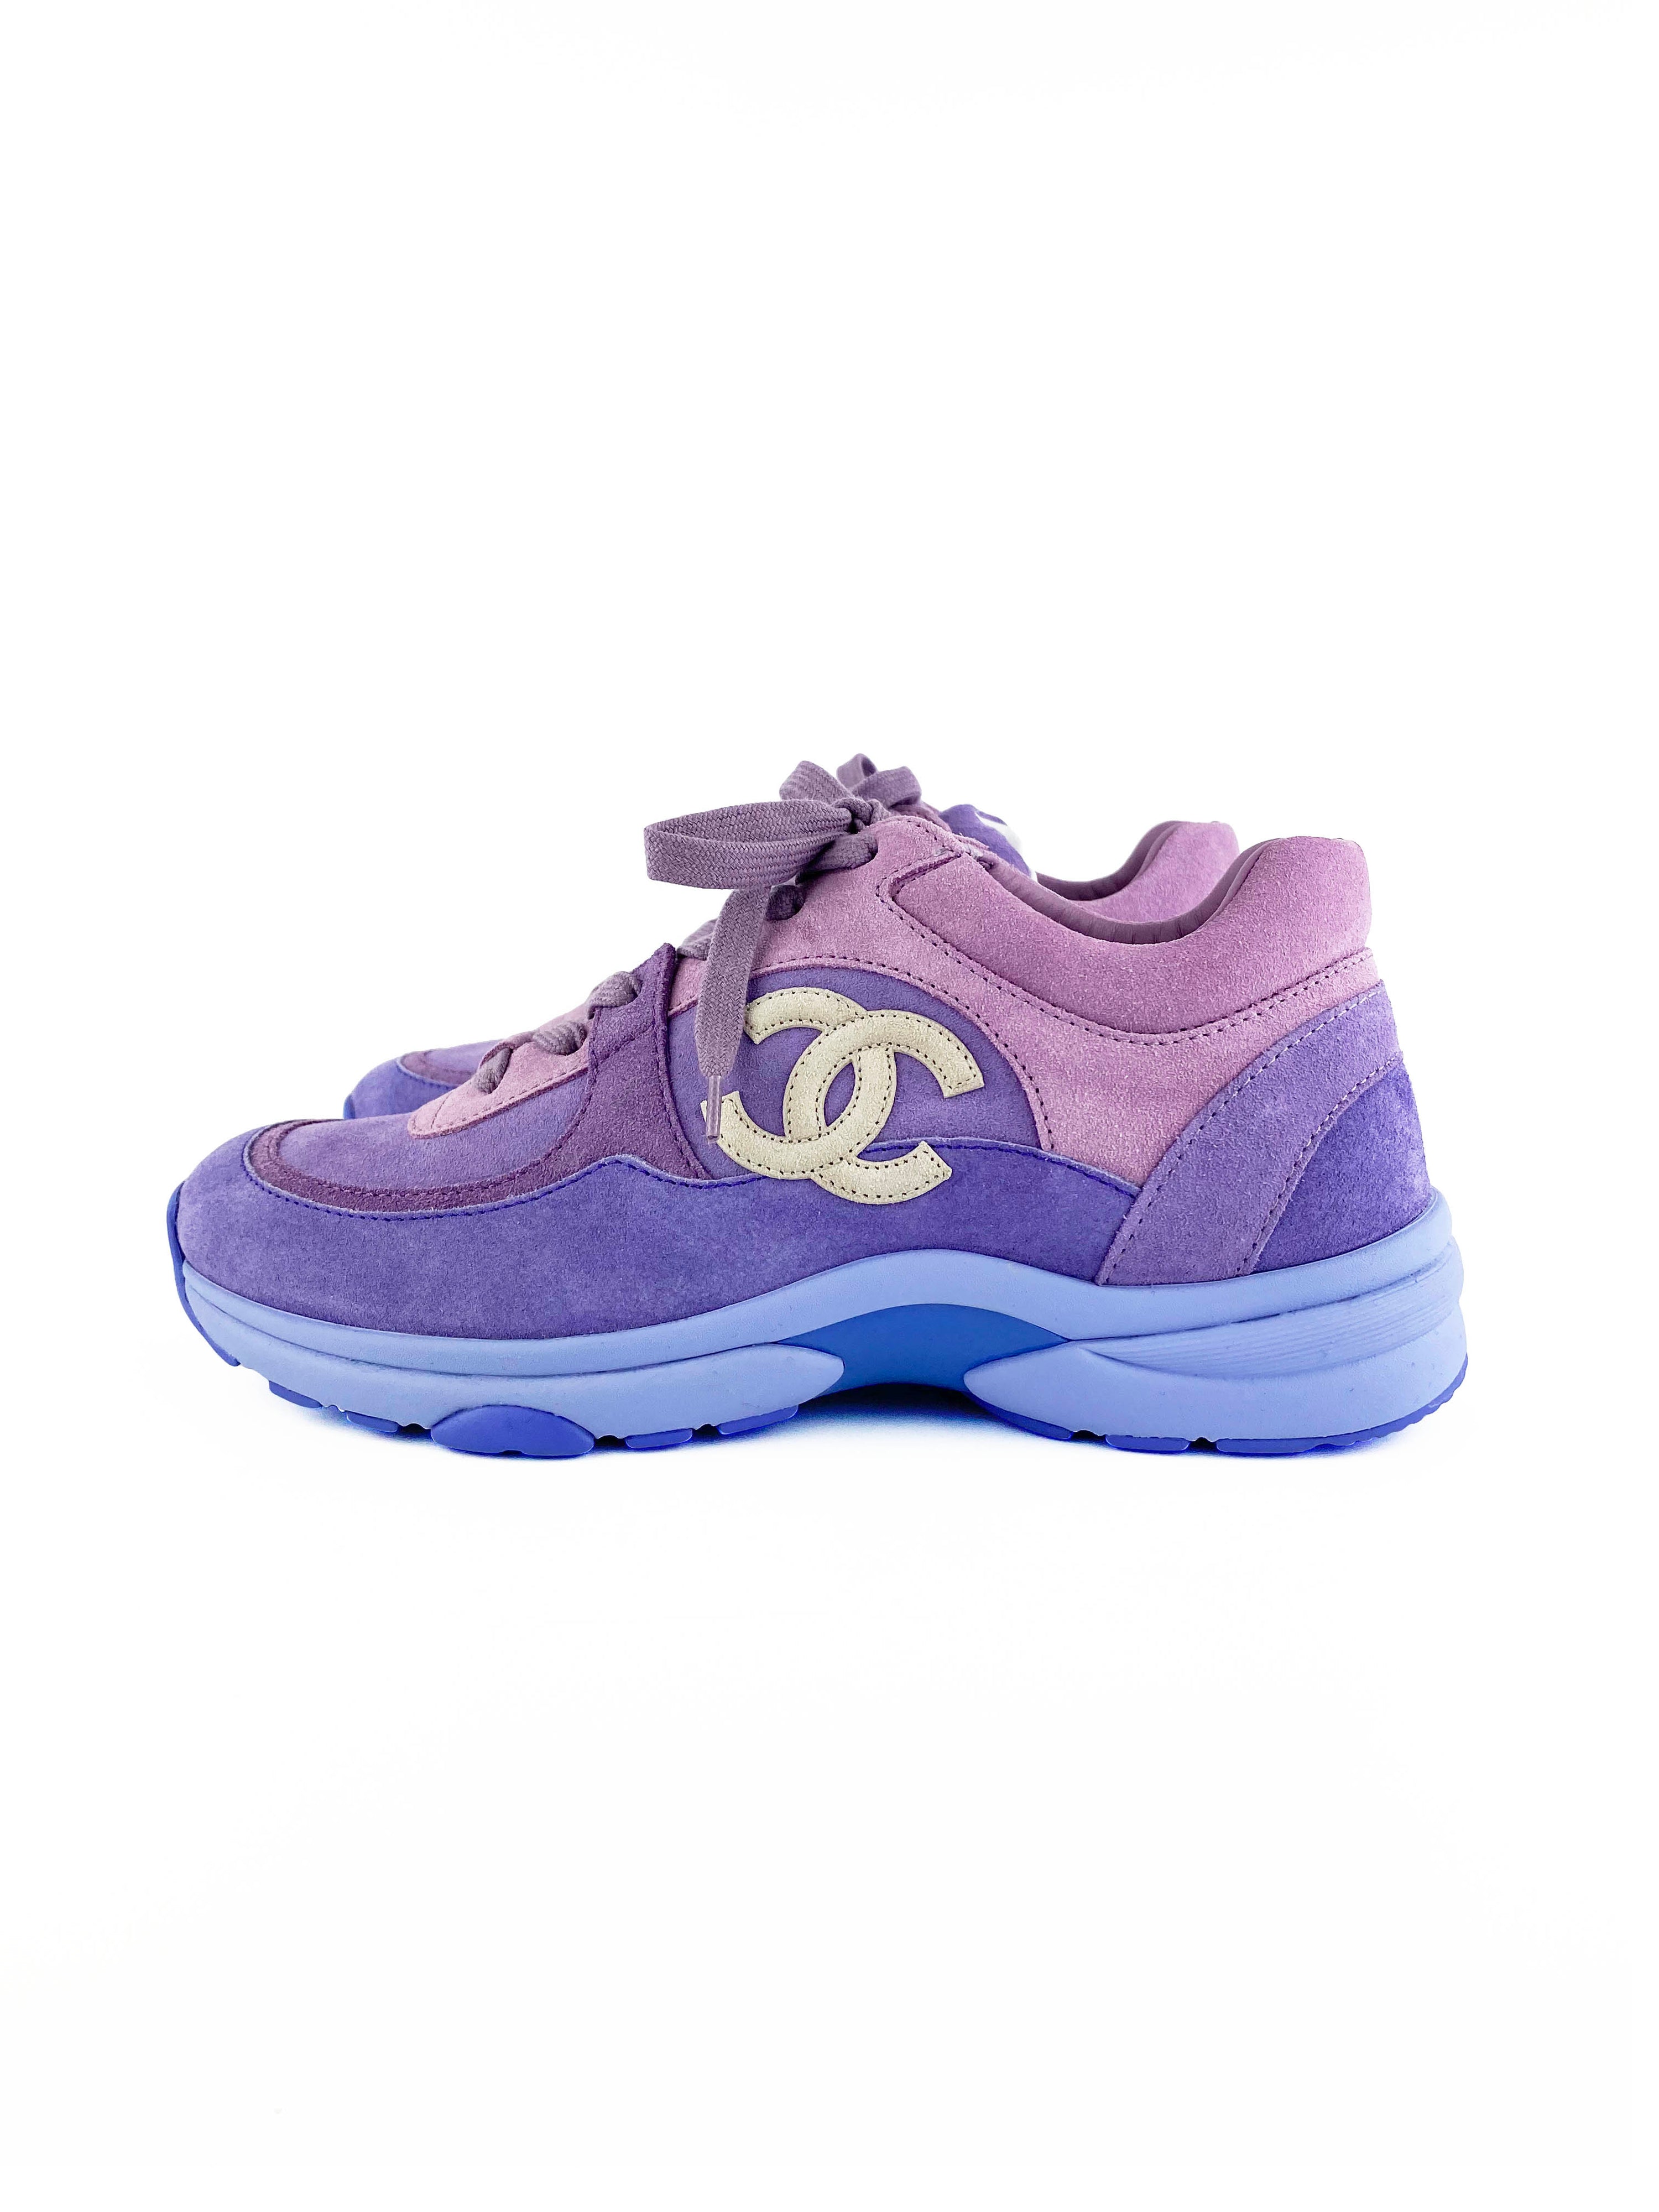 Chanel Purple Suede CC Sneakers 38